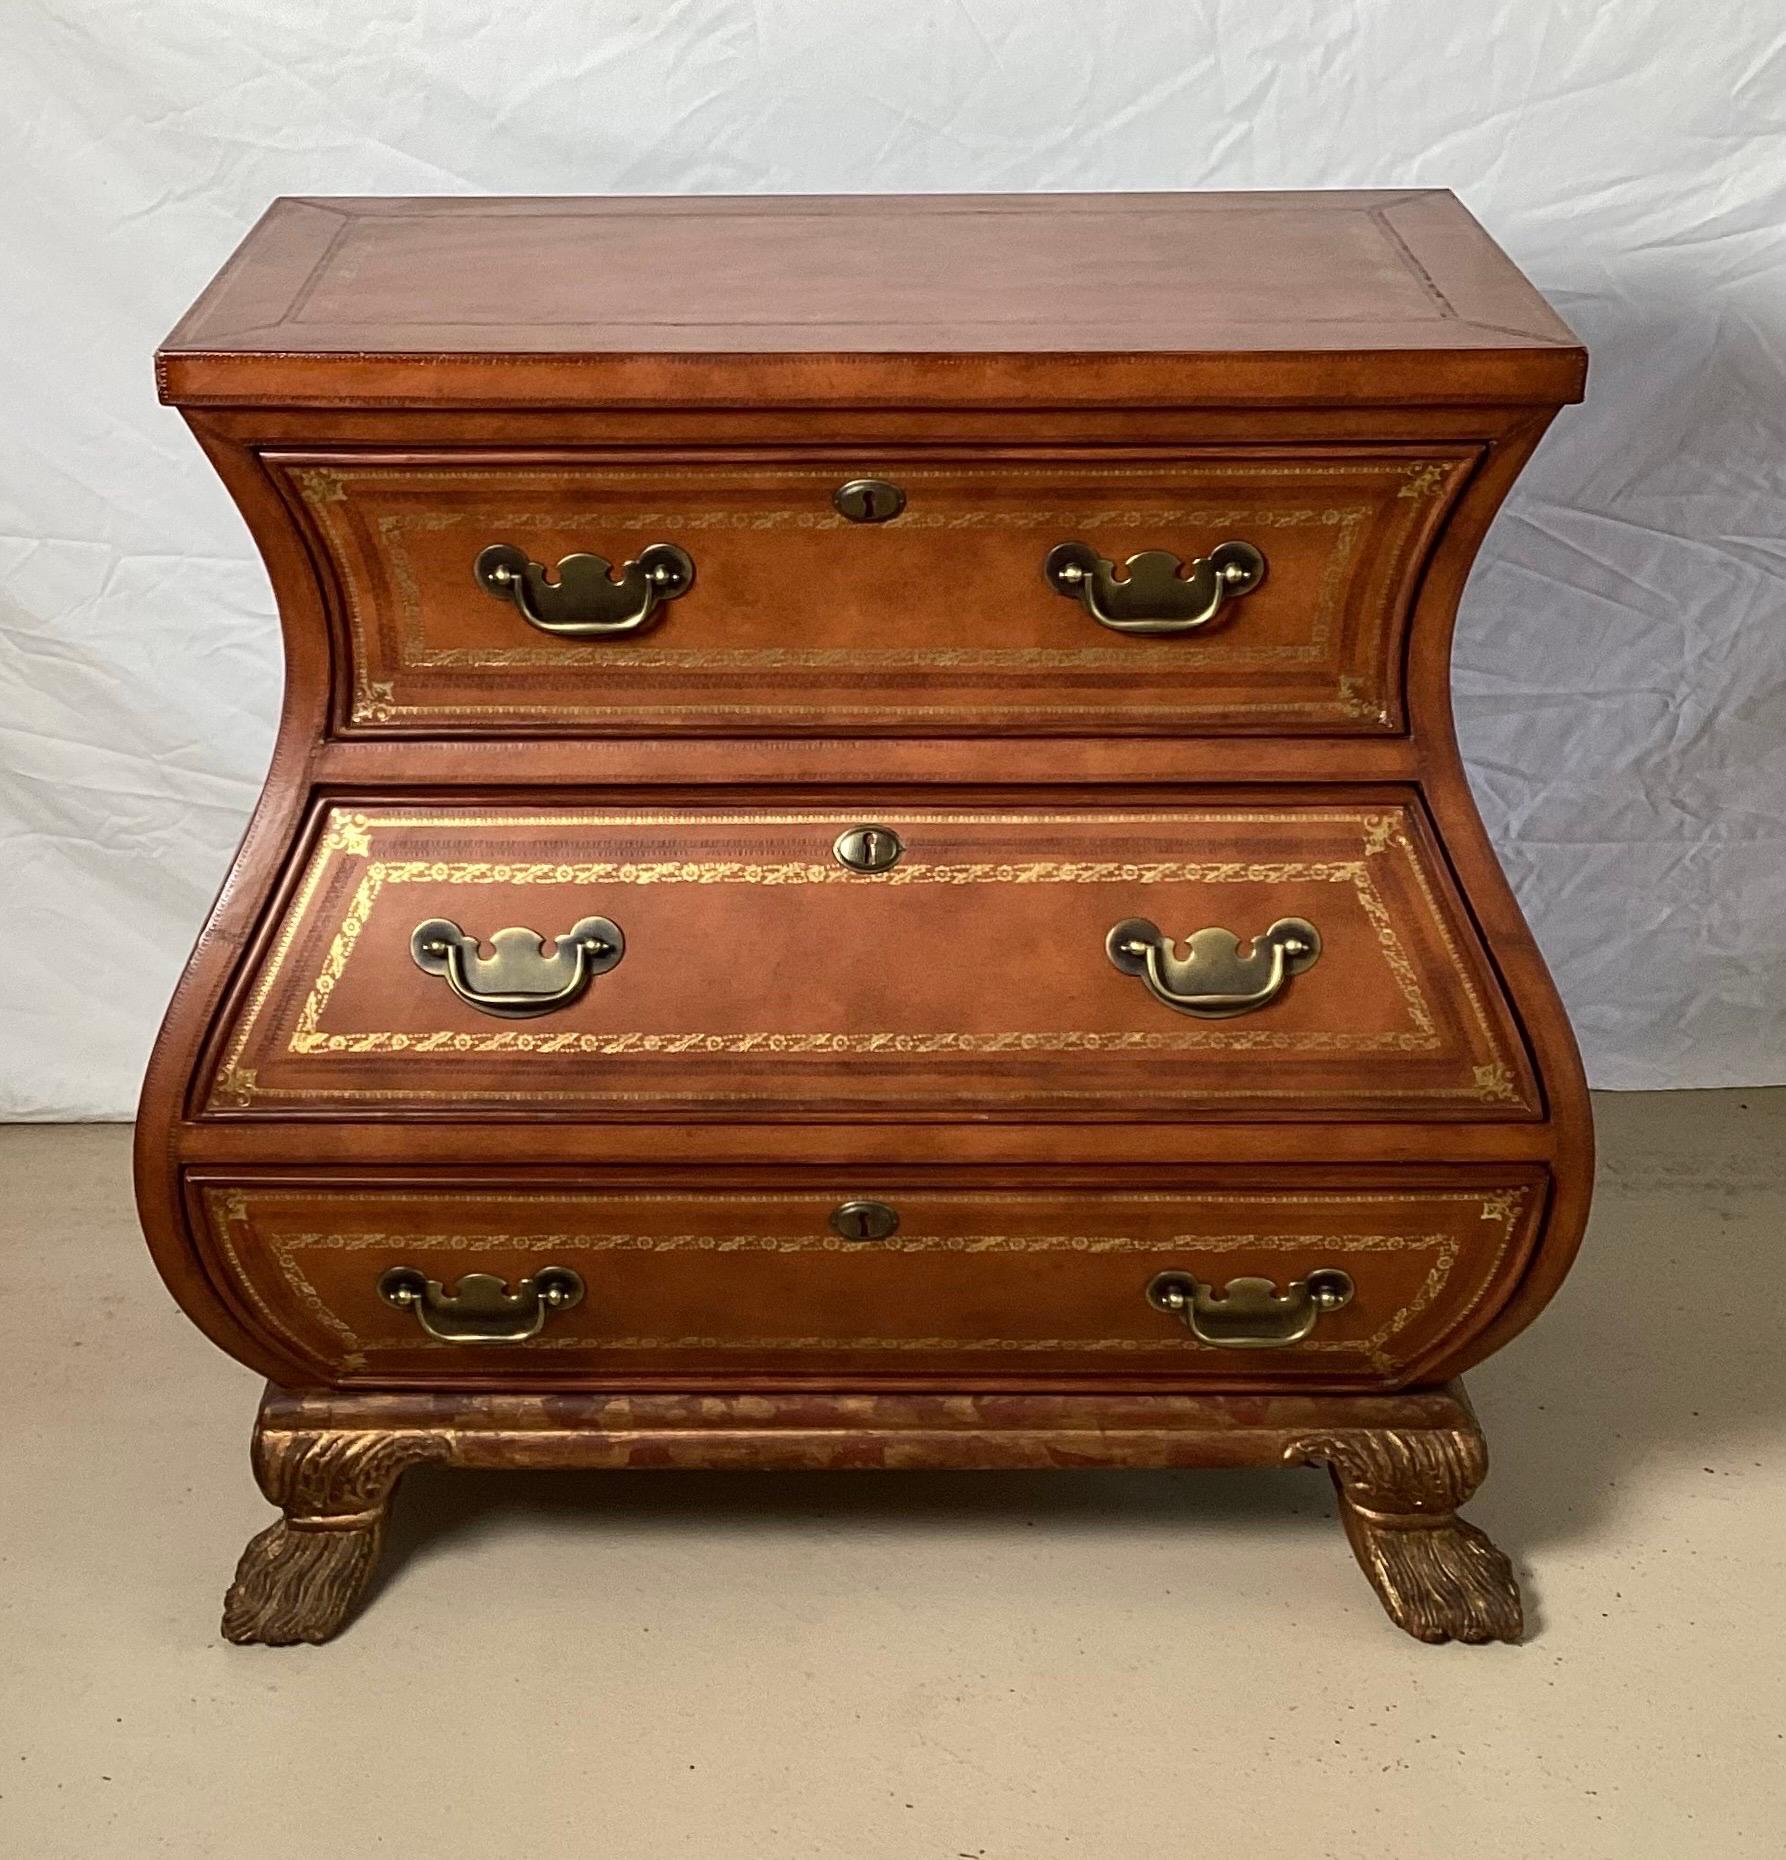 Handsome Leather Covered Bombe chest, made in Italy with brass handles. The medium caramel colored leather with gold tooling along the top and drawer fronts. The base is hand carved with an aged gilt wash to the surface. Very shapely and in